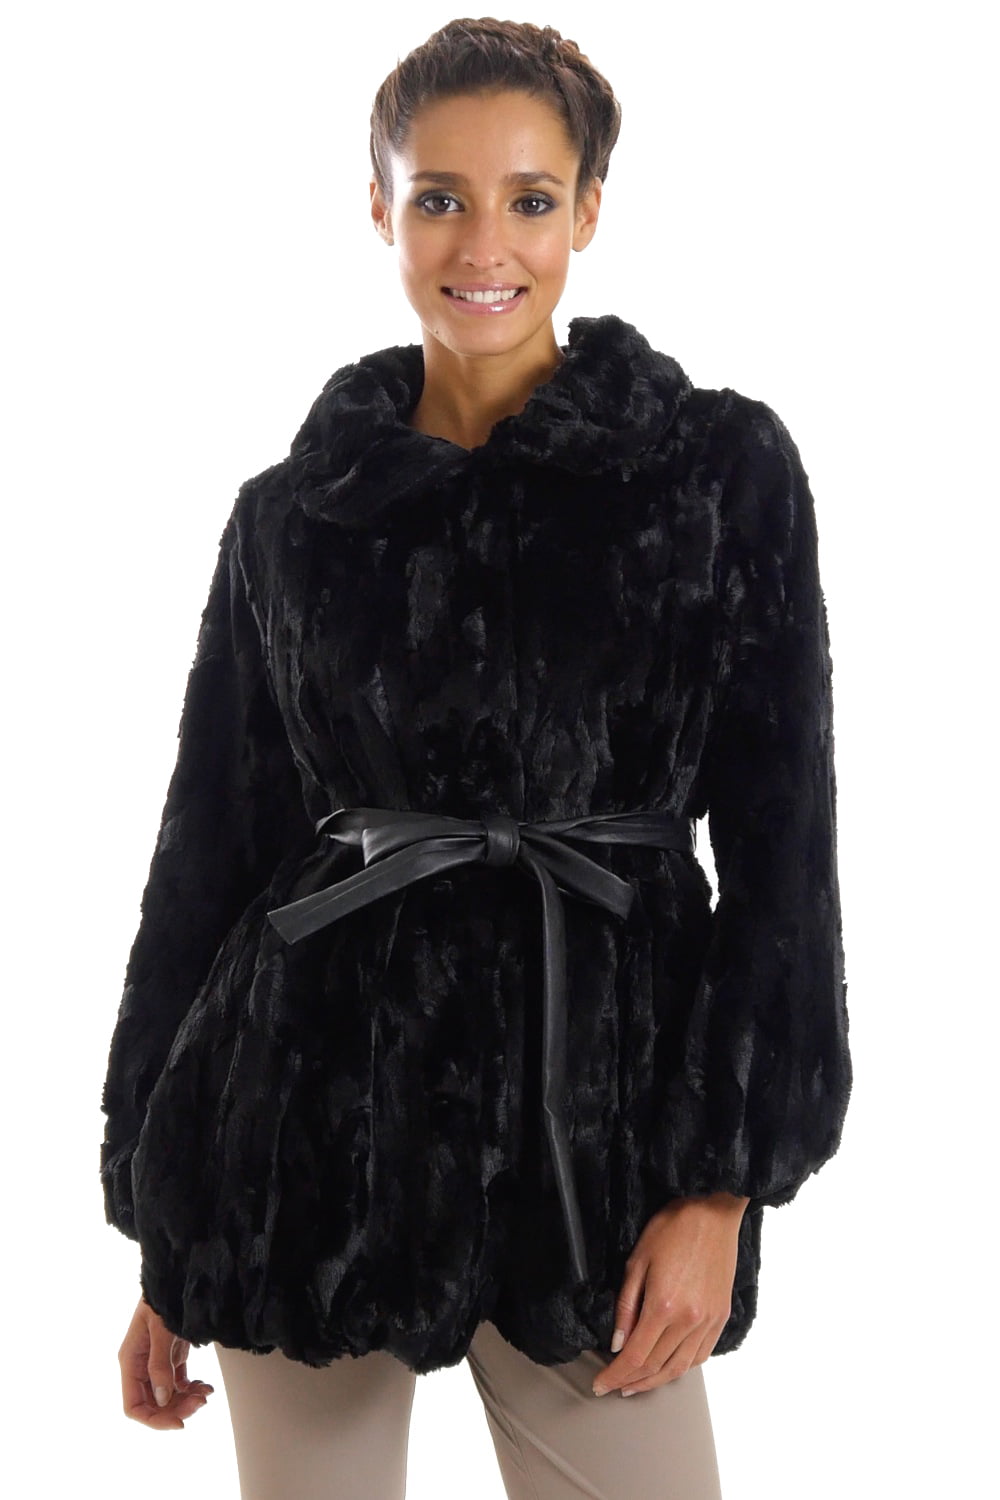 Allonly Womens Fashion Stand Collar Faux Fur Long Sleeves Warm Winter Long Black Coat with Belt